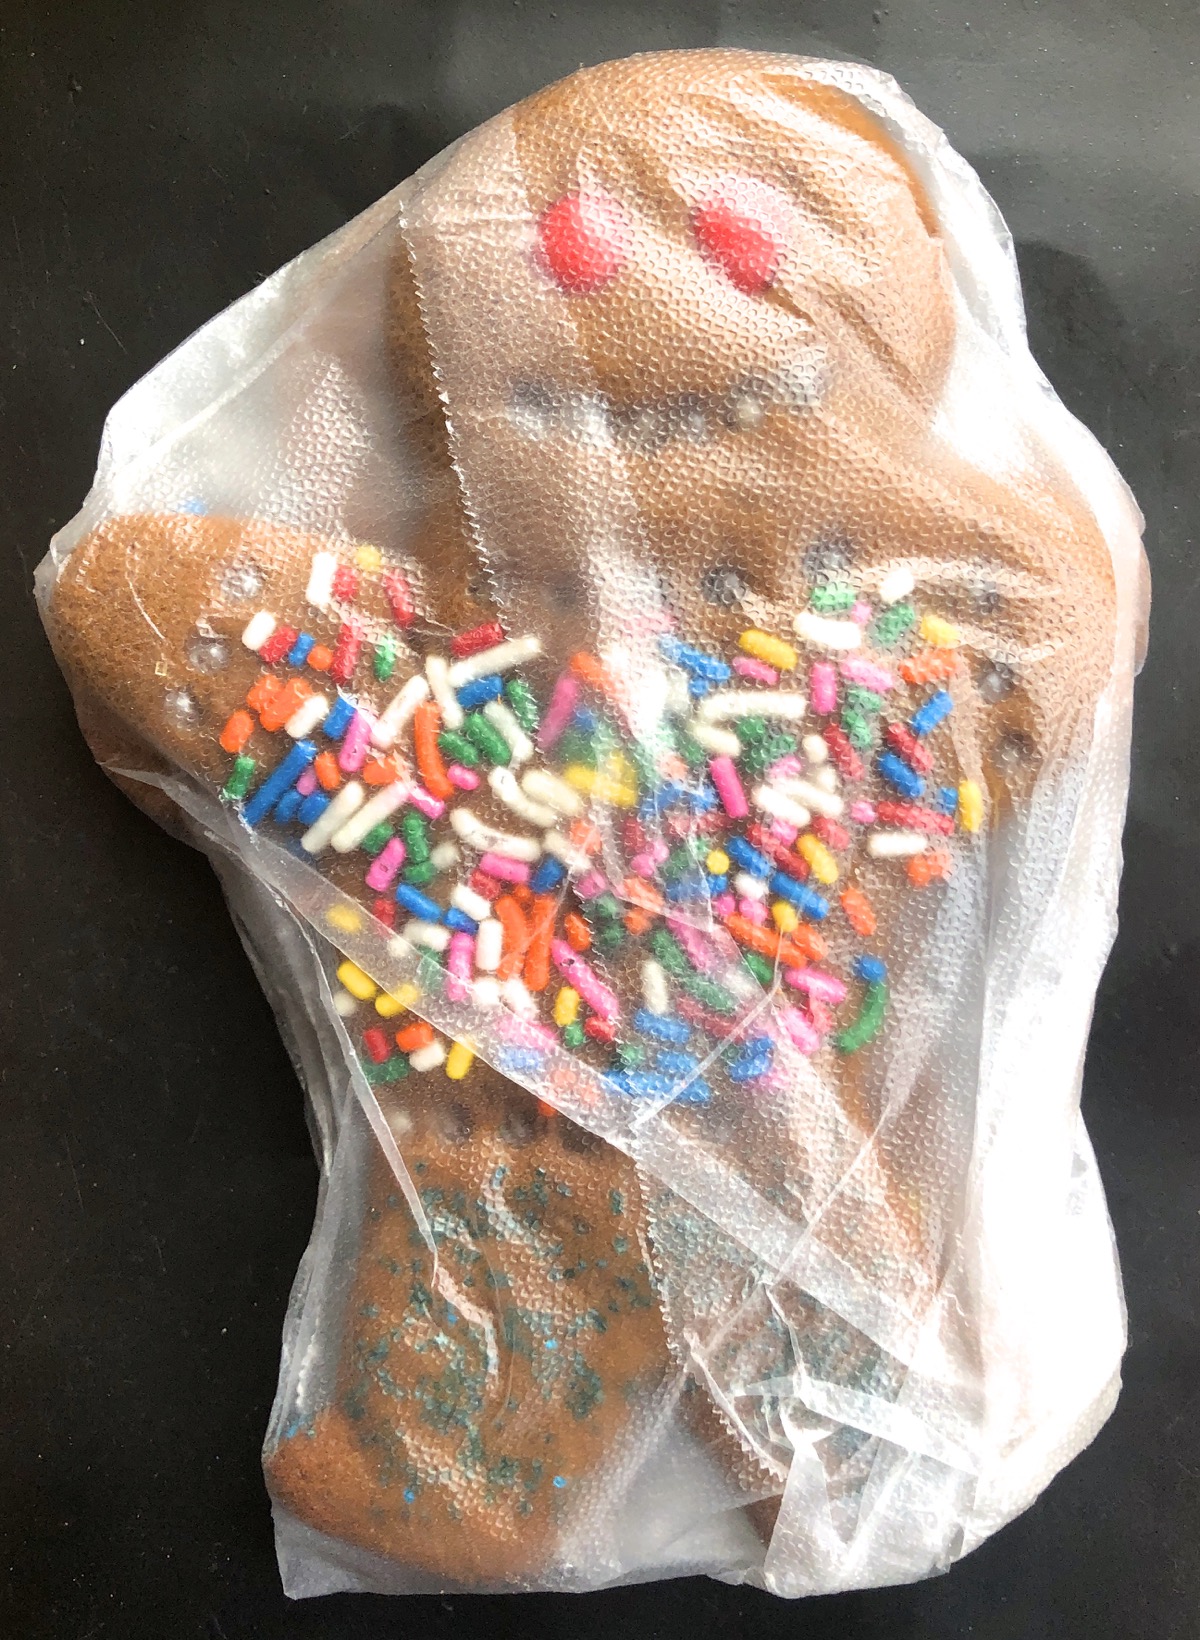 Decorated gingerbread man wrapped in plastic.